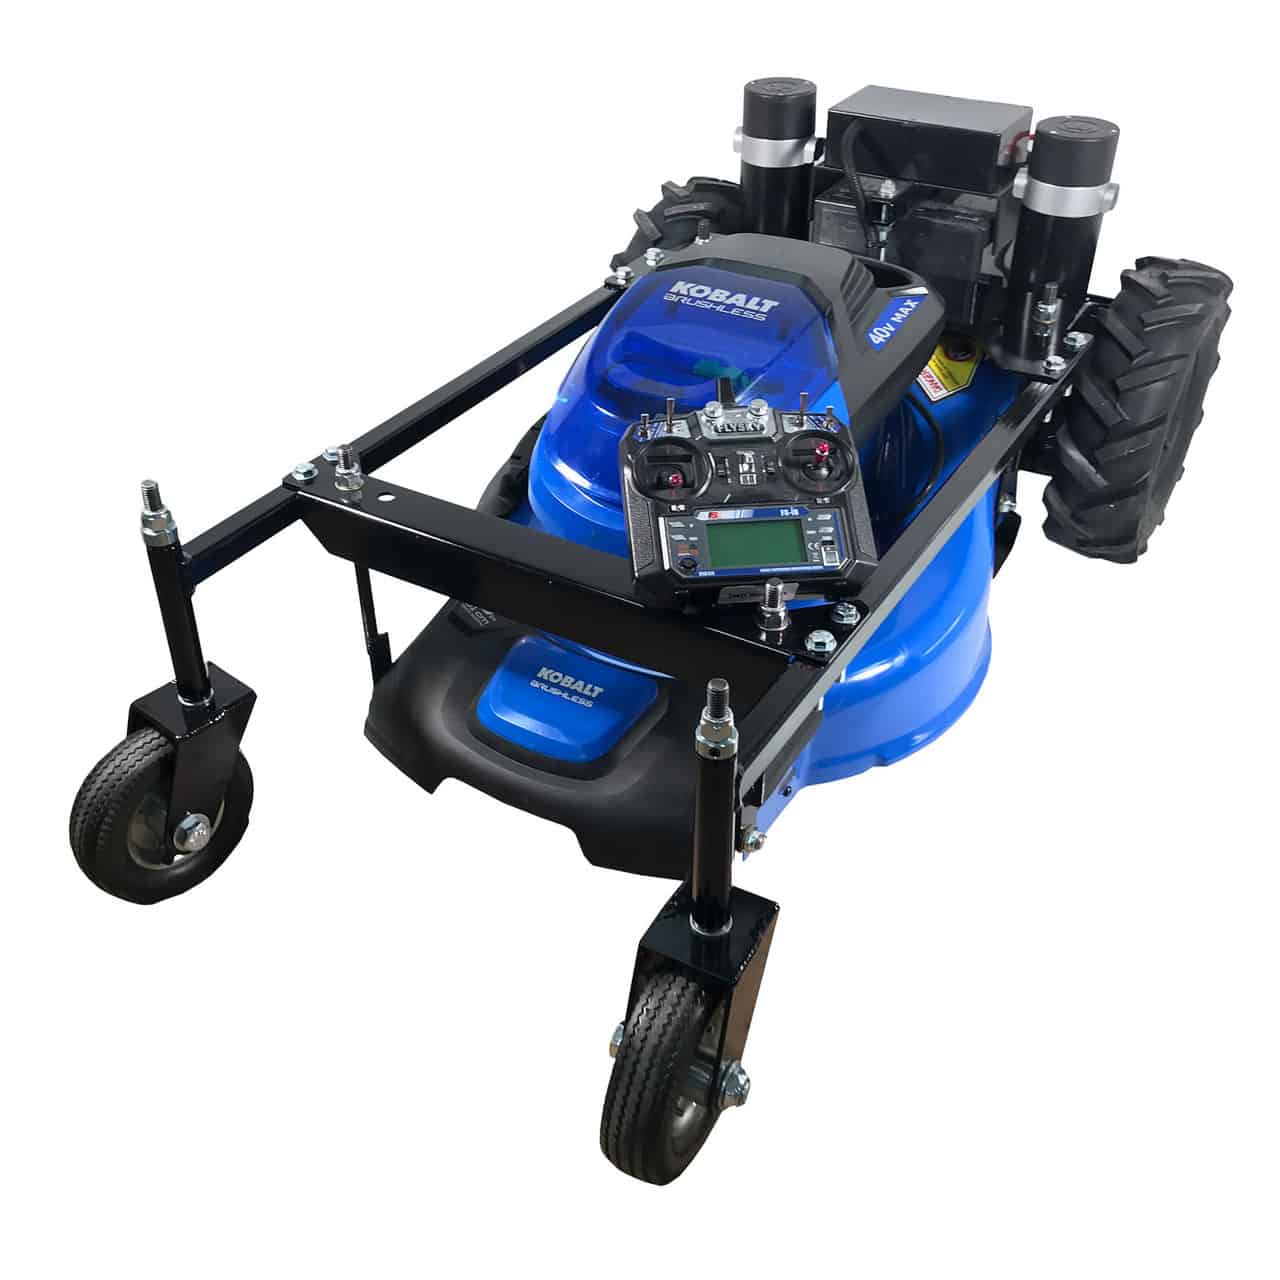 RC mower chassis with Kobalt electric mower